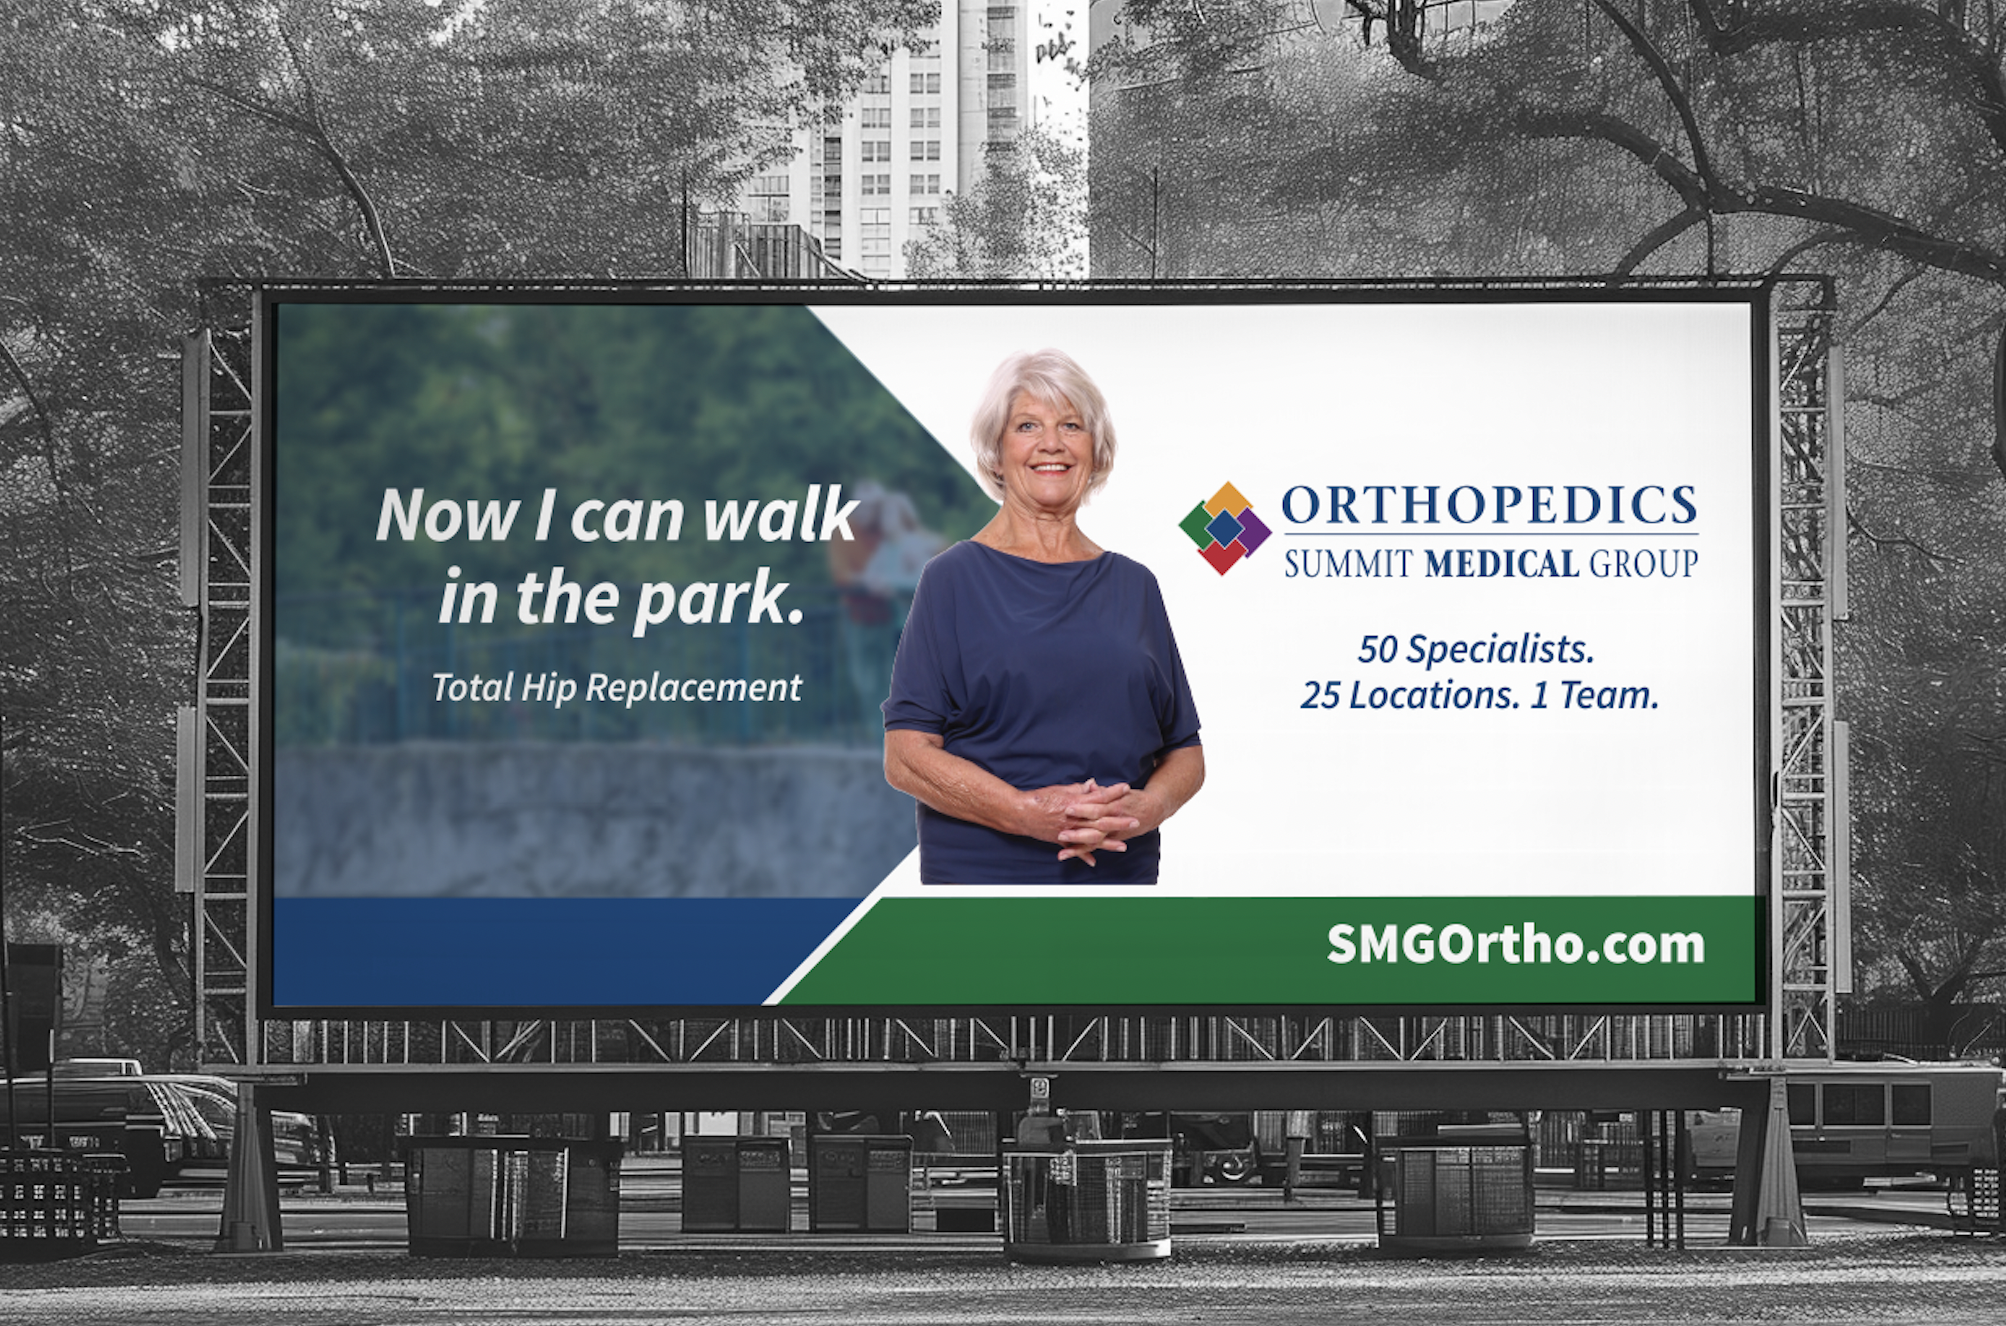 Mockup of a billboard advertisement for a healthcare provider